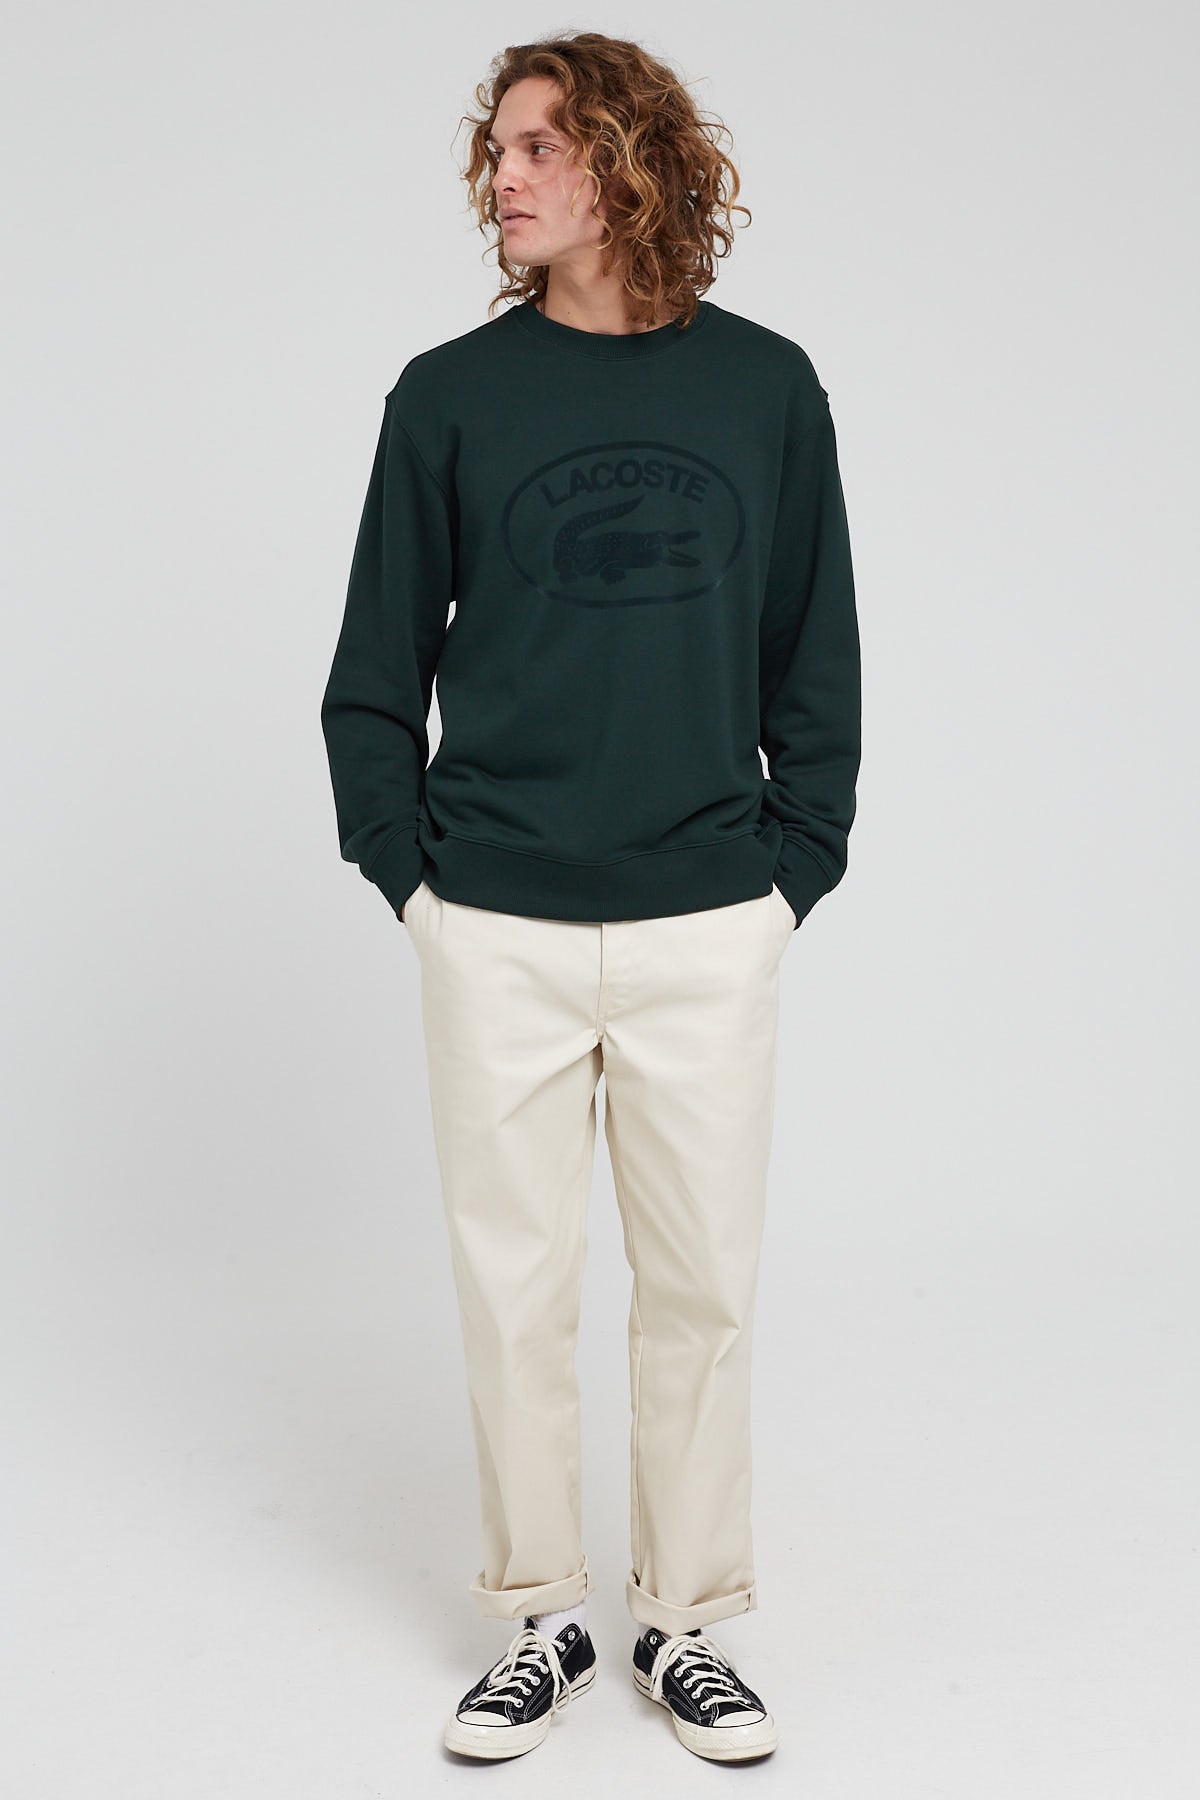 Lacoste Originals Relaxed Fit Sweat Green